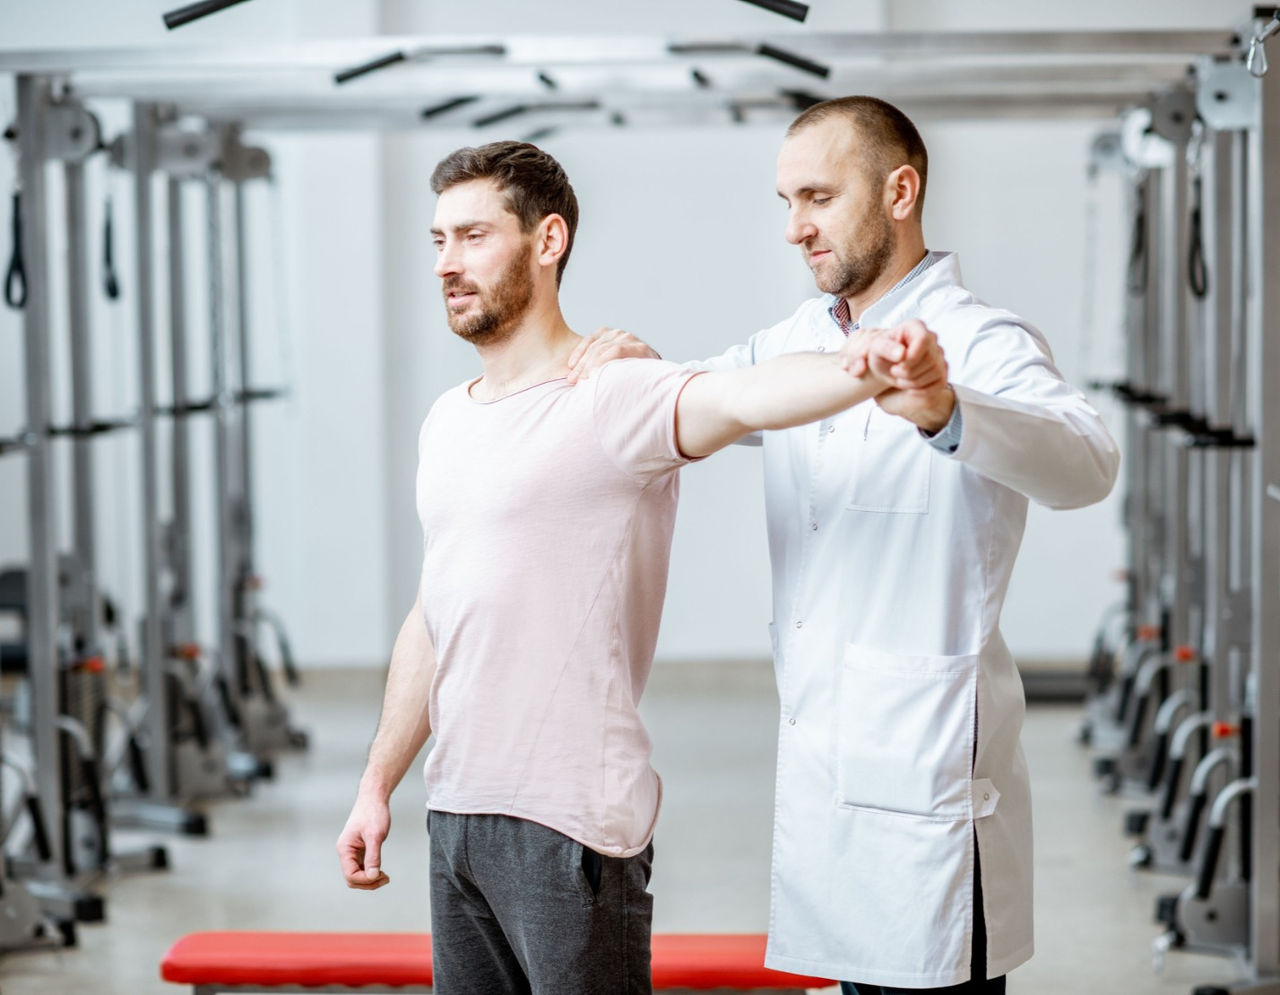 Male provider performing standing exercise with male patient 